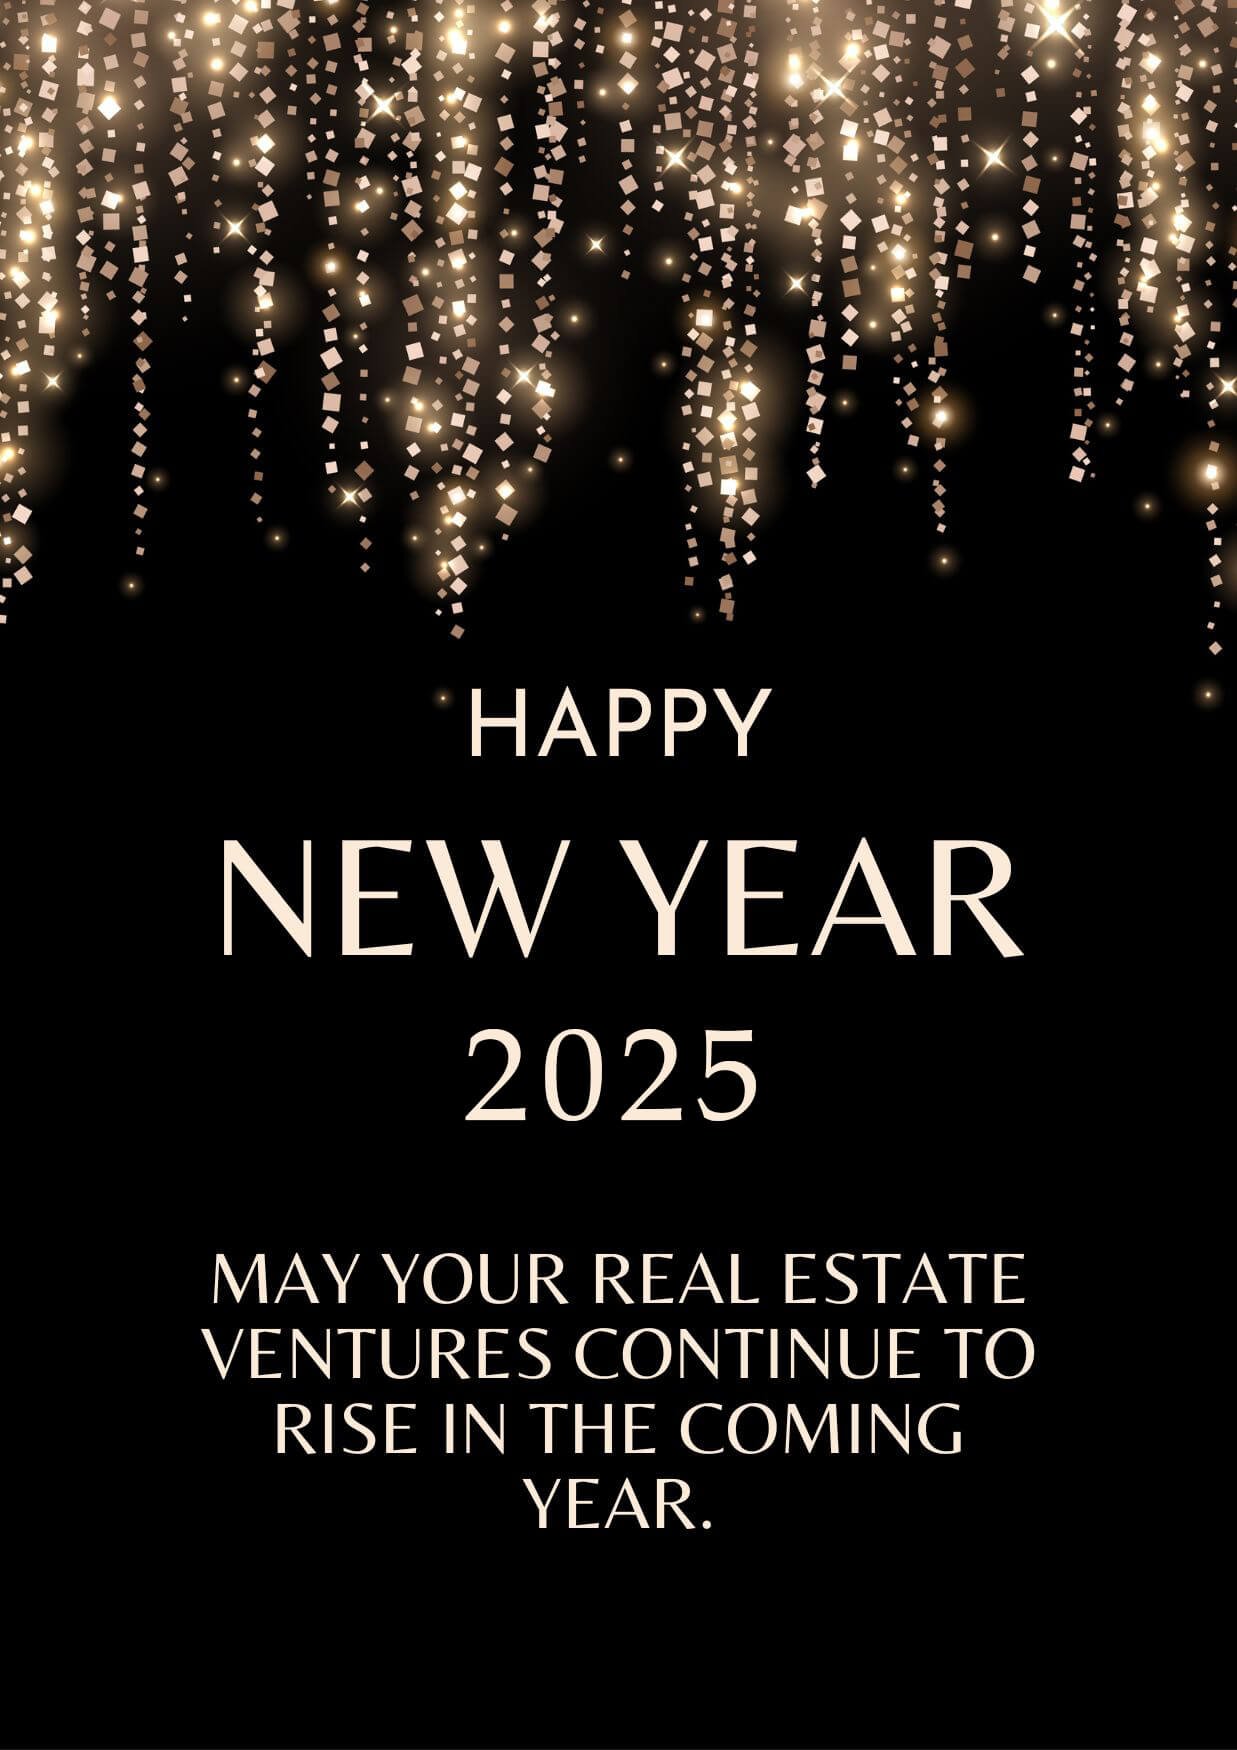 Happy New Year Quotes 2025 For Real Estate